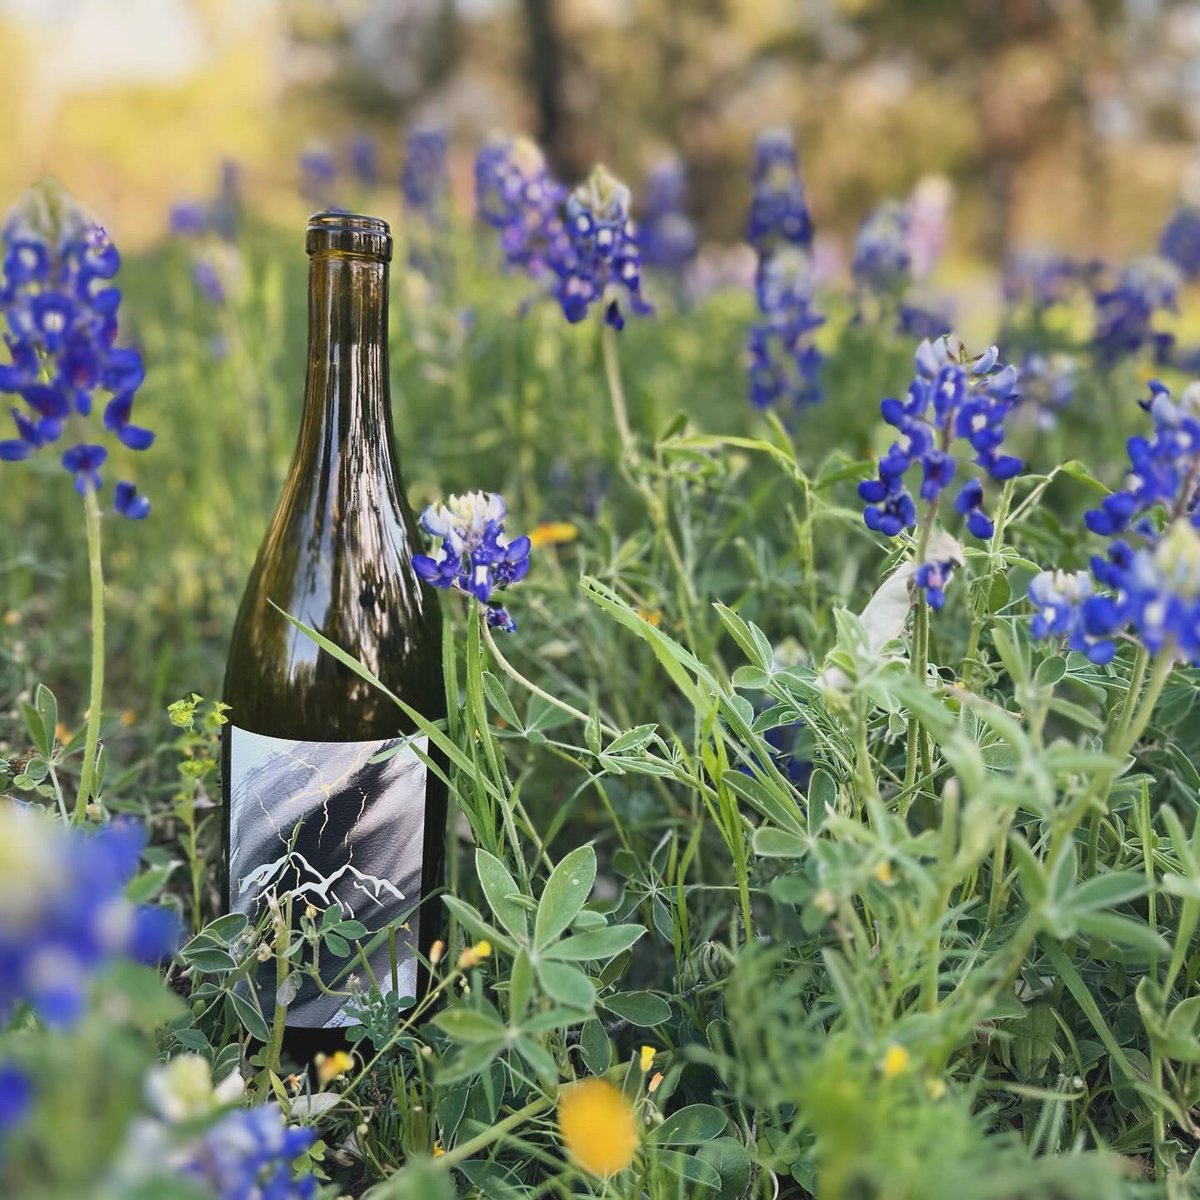 If you’re not posing in the bluebonnets are you even a Texan? We’ve been enjoying an incredibly pretty spring season… and obviously great wine! 😝